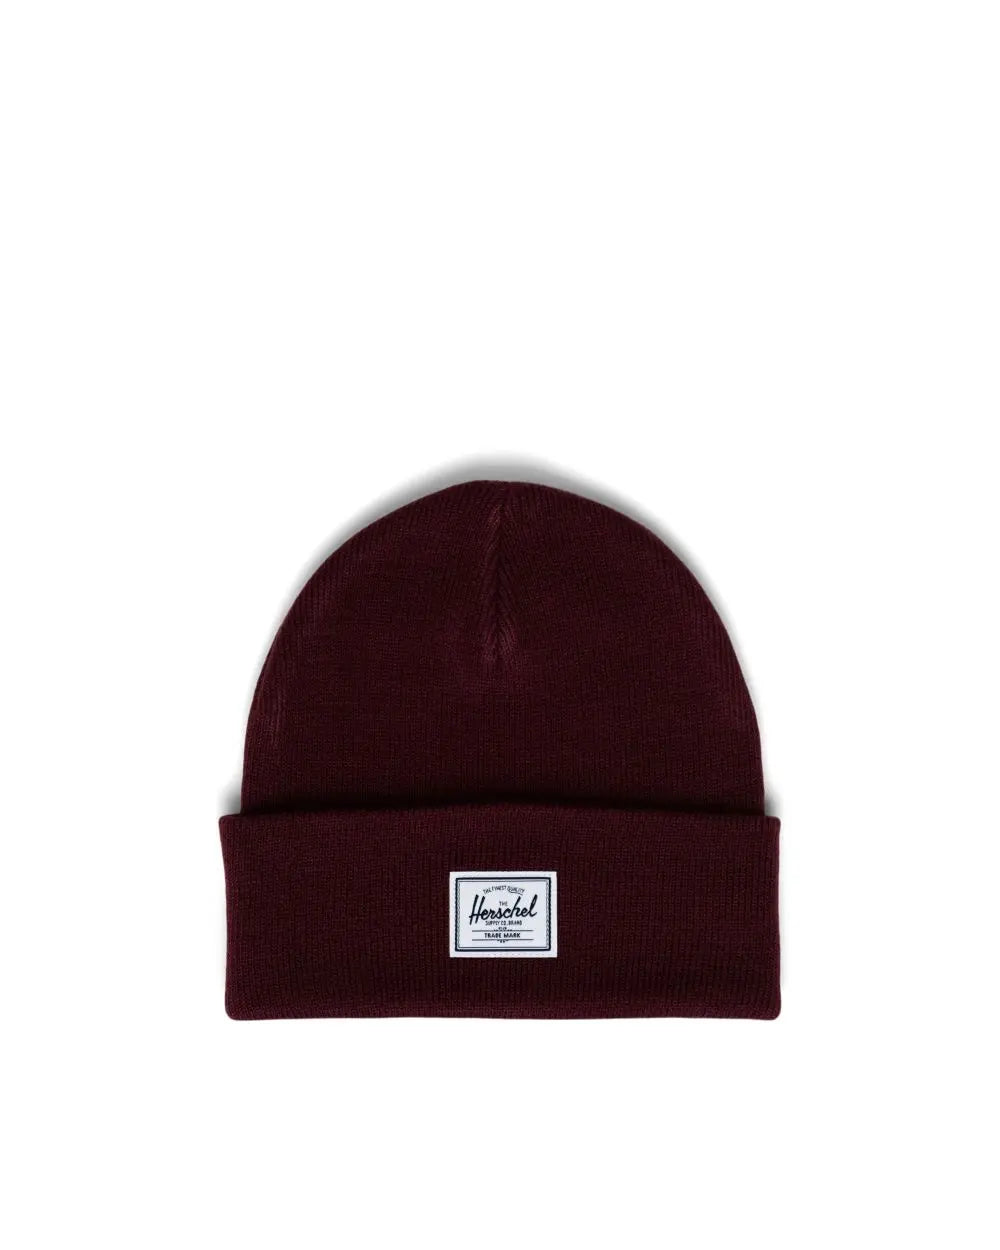 Superdry Womens Classic Knitted Beanie Hat Track Burgundy Marl - Donaghys